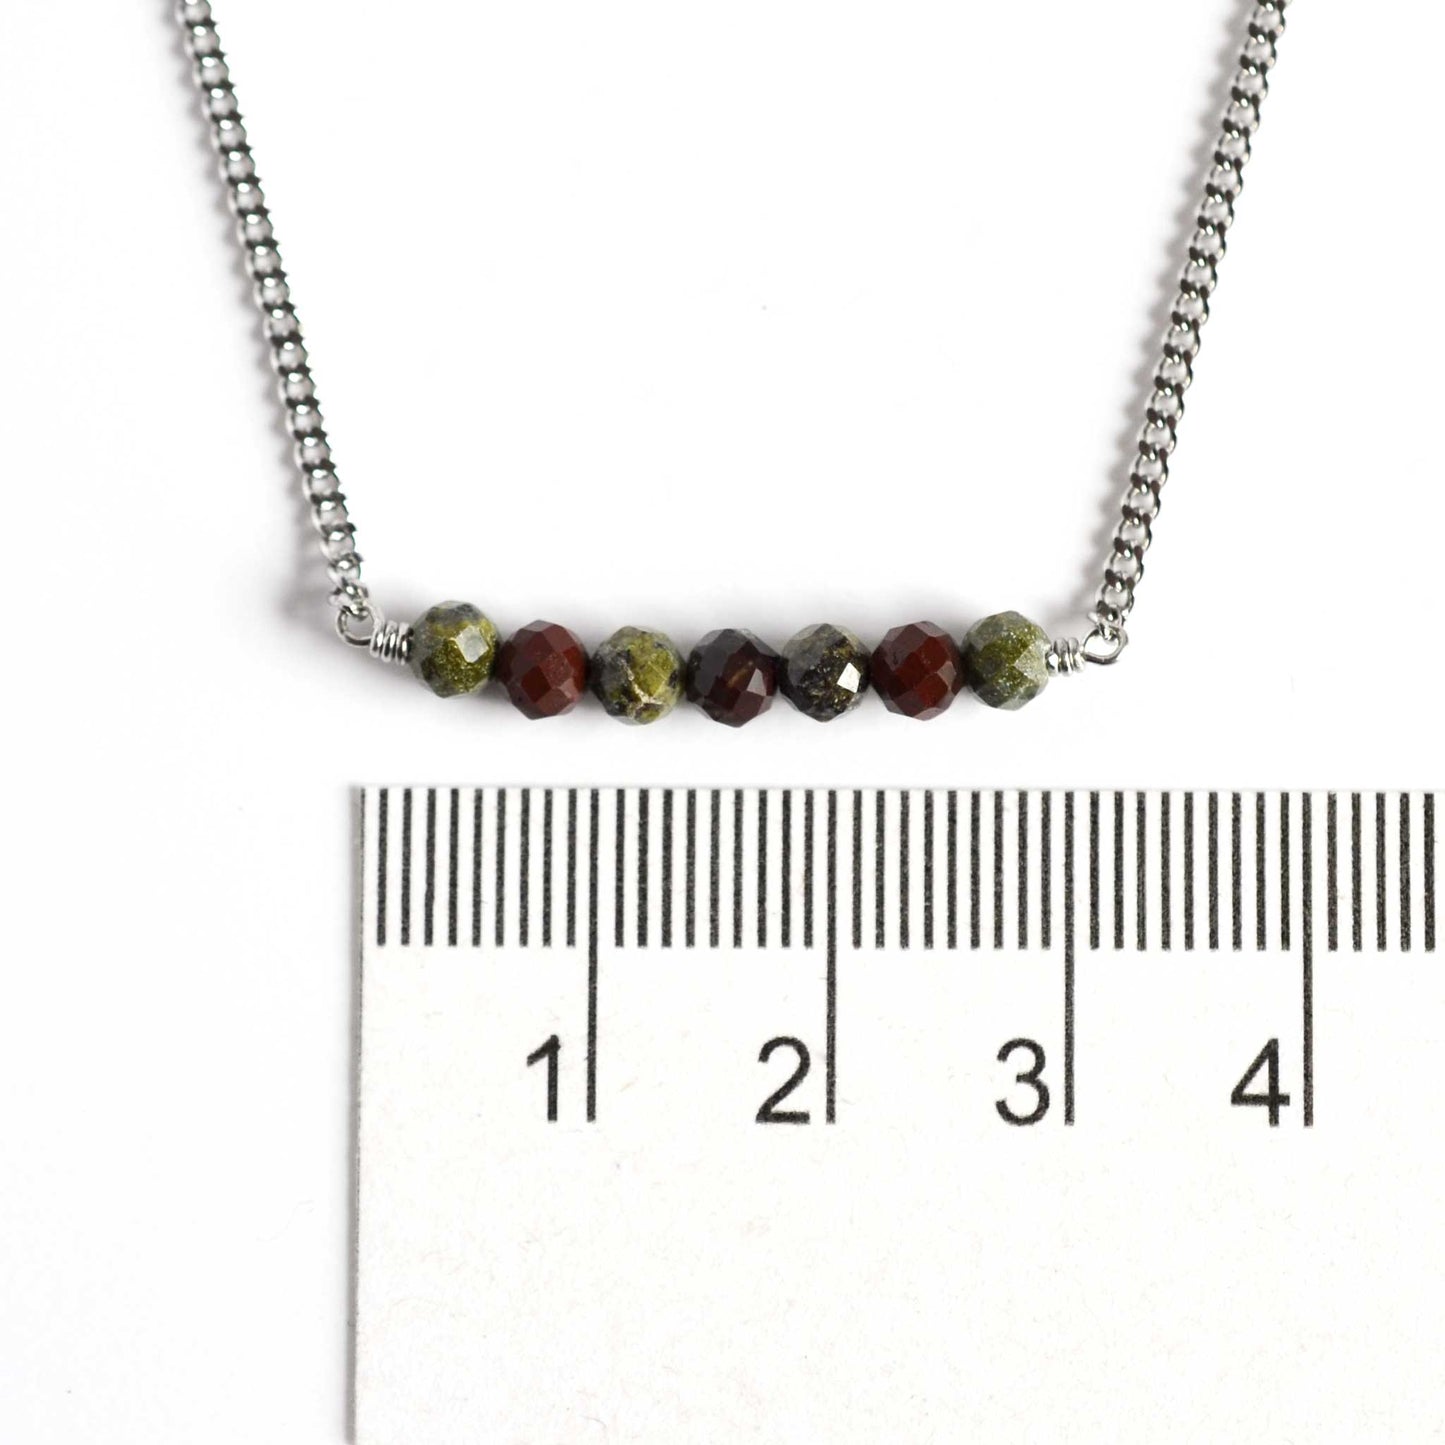 Dainty Bloodstone necklace with 4mm green stone beads next to ruler